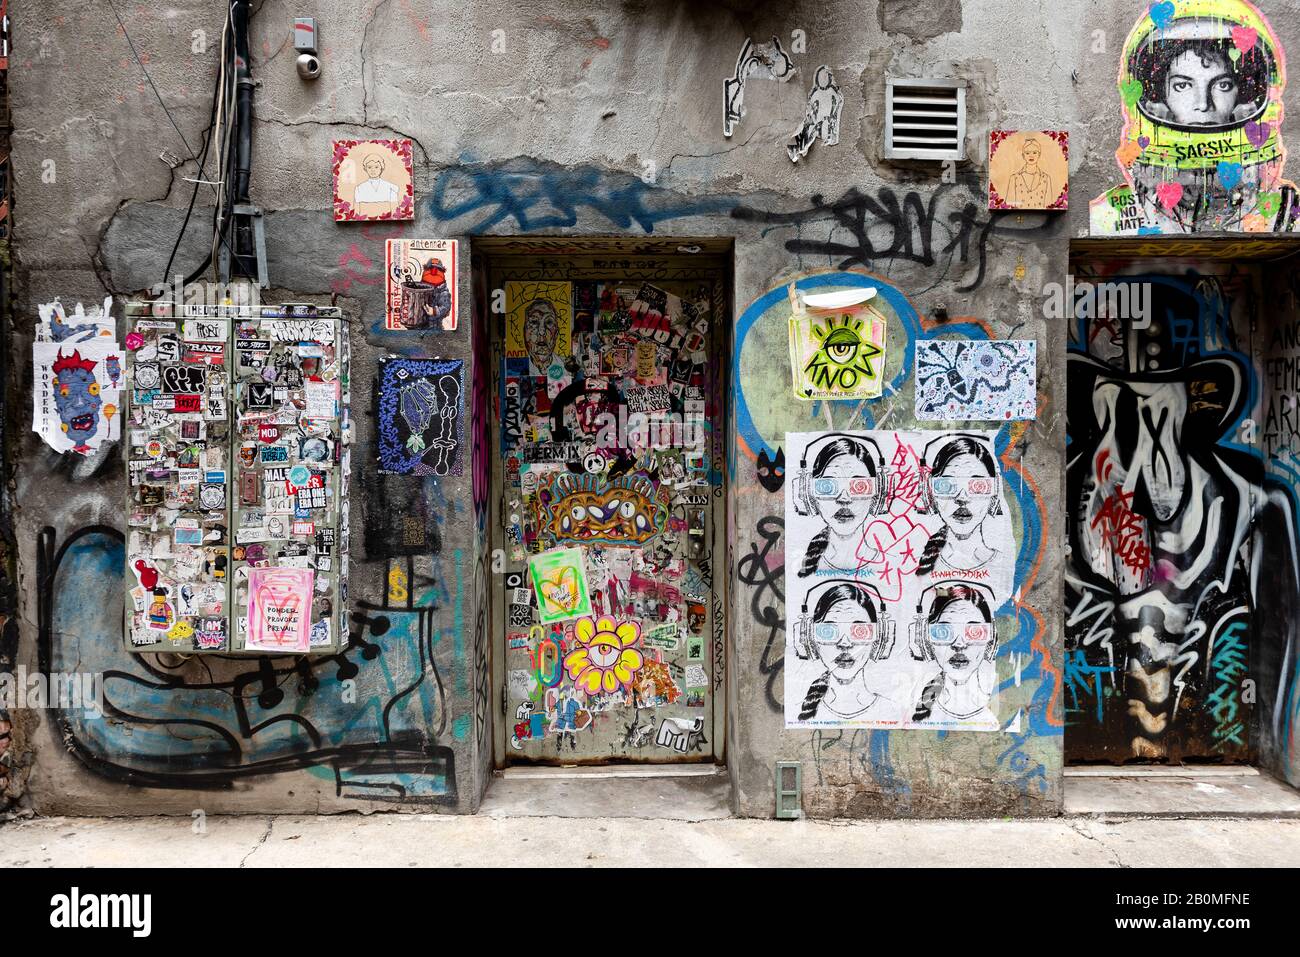 Graffiti covers an otherwise dull, gray wall in an alley on the Lower East Side, New York. Stock Photo